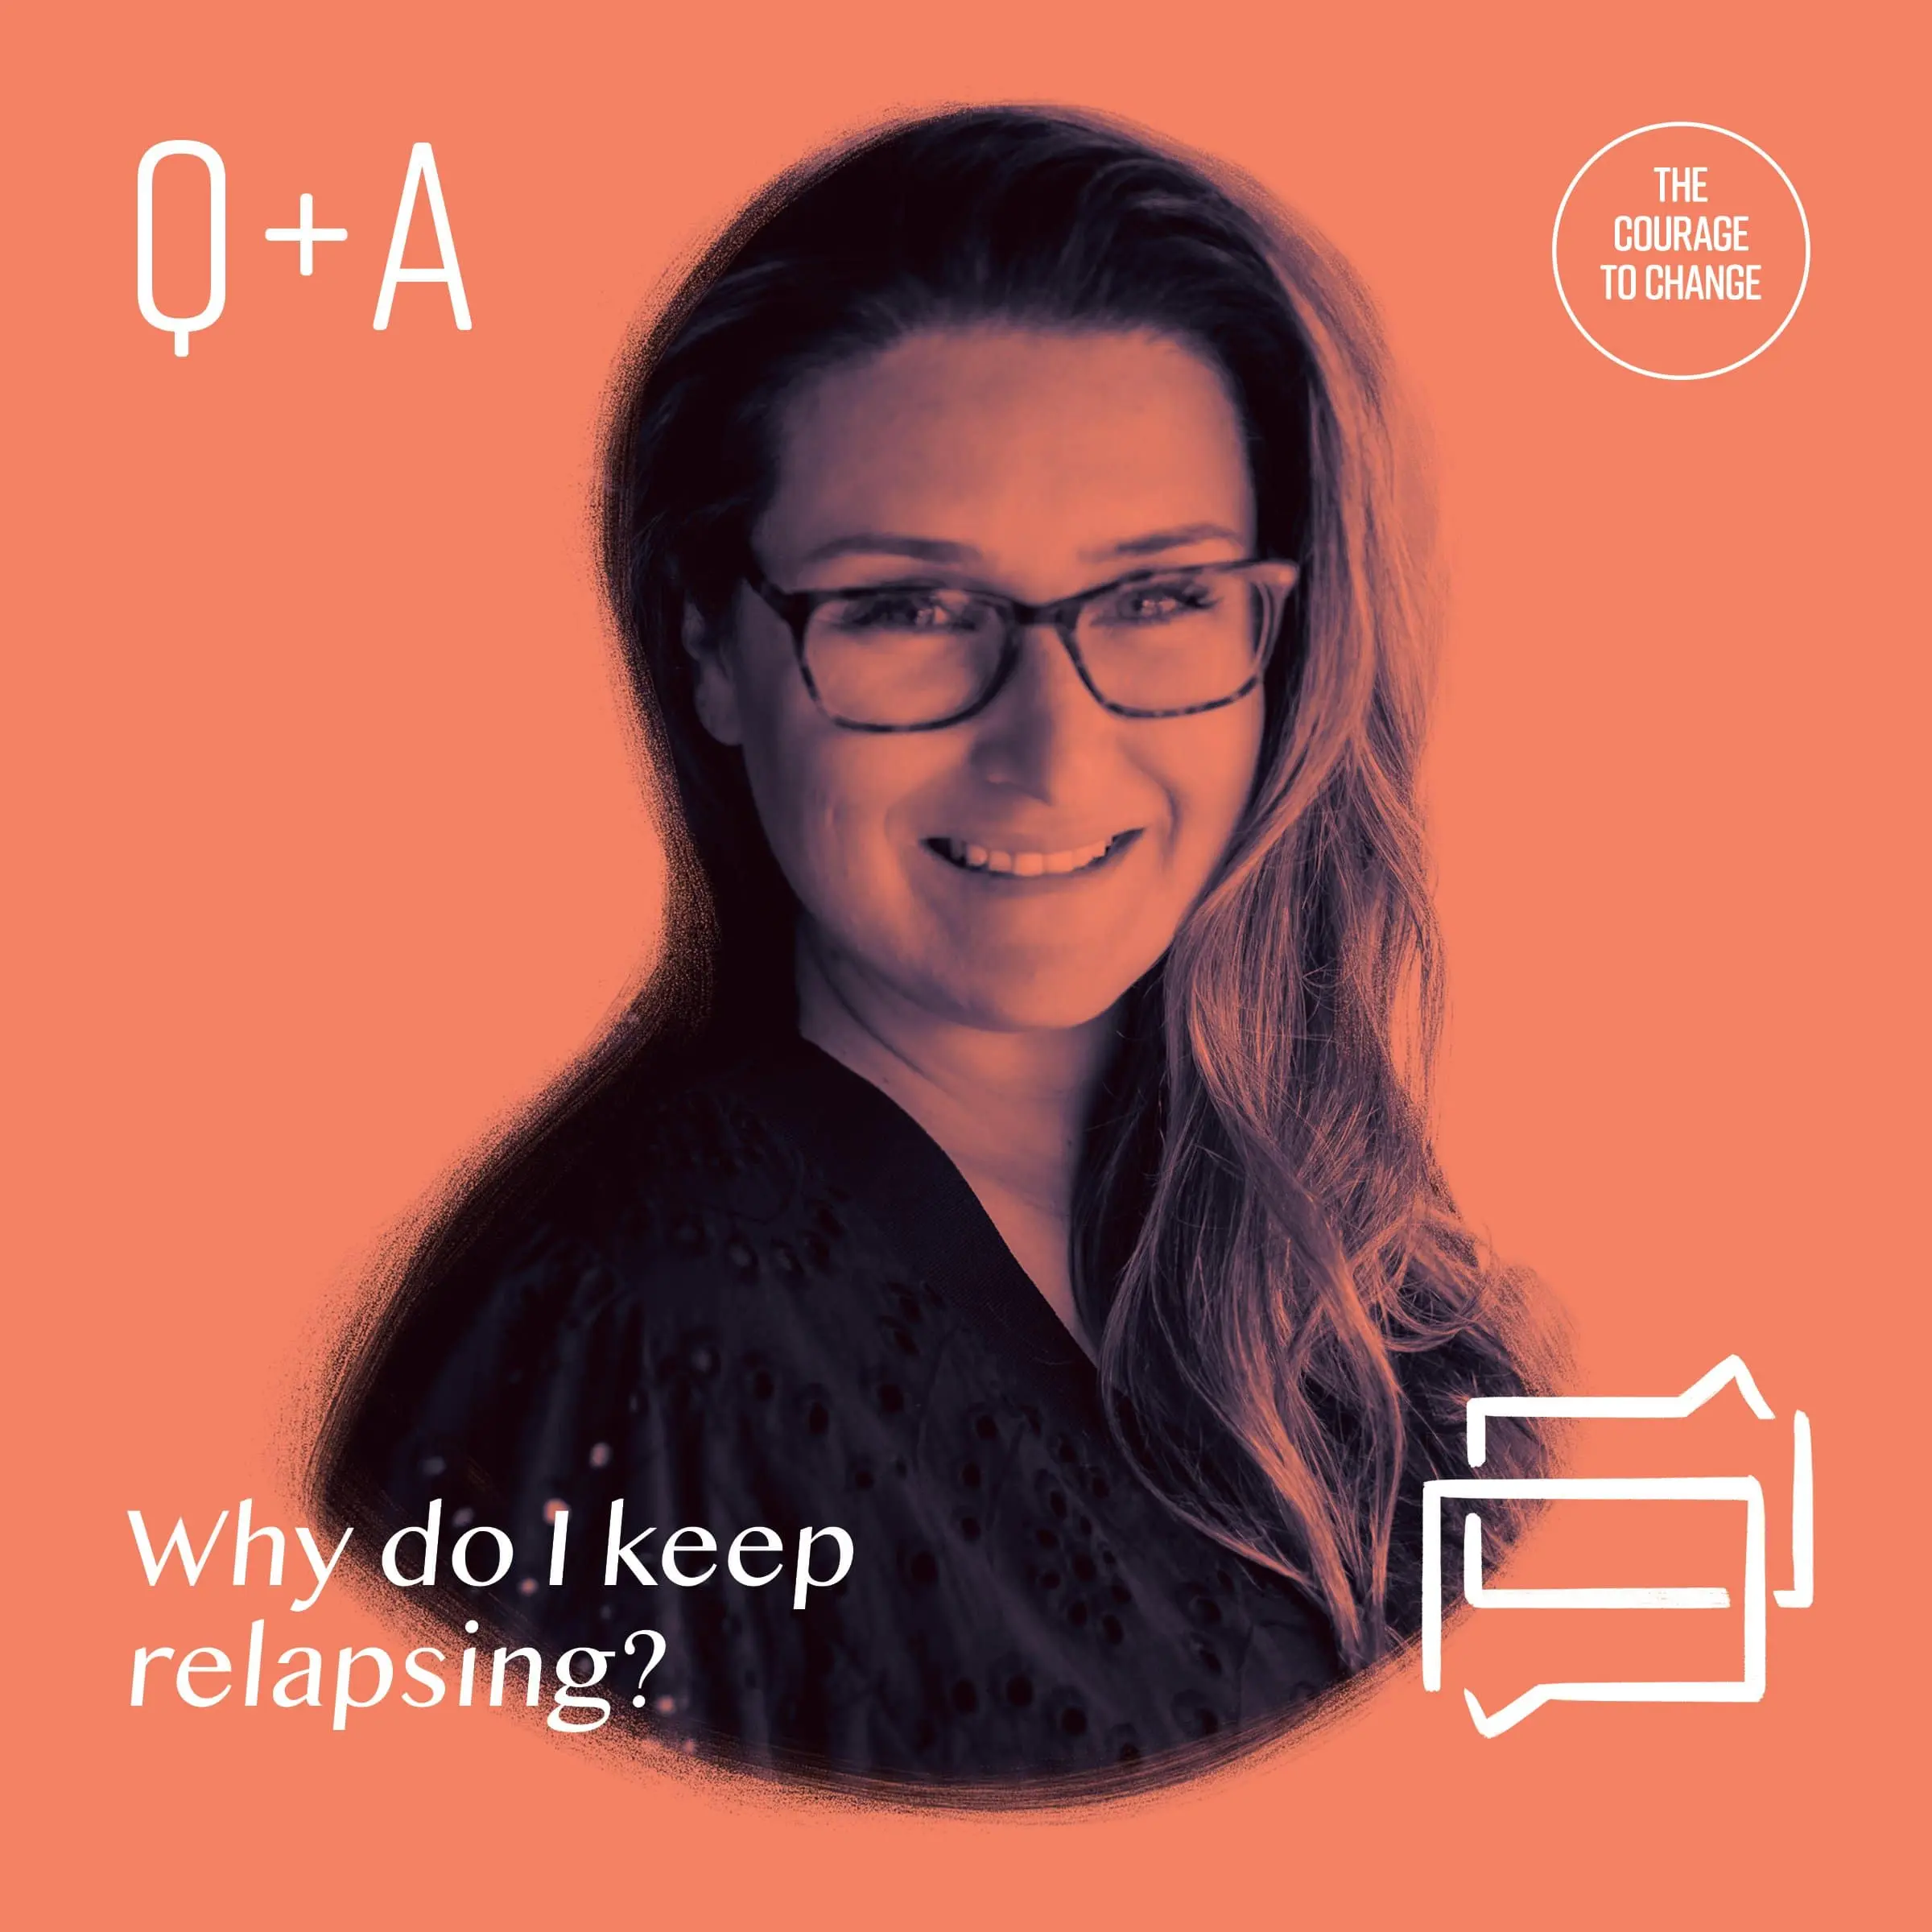 Q+A Why Do I Keep Relapsing?